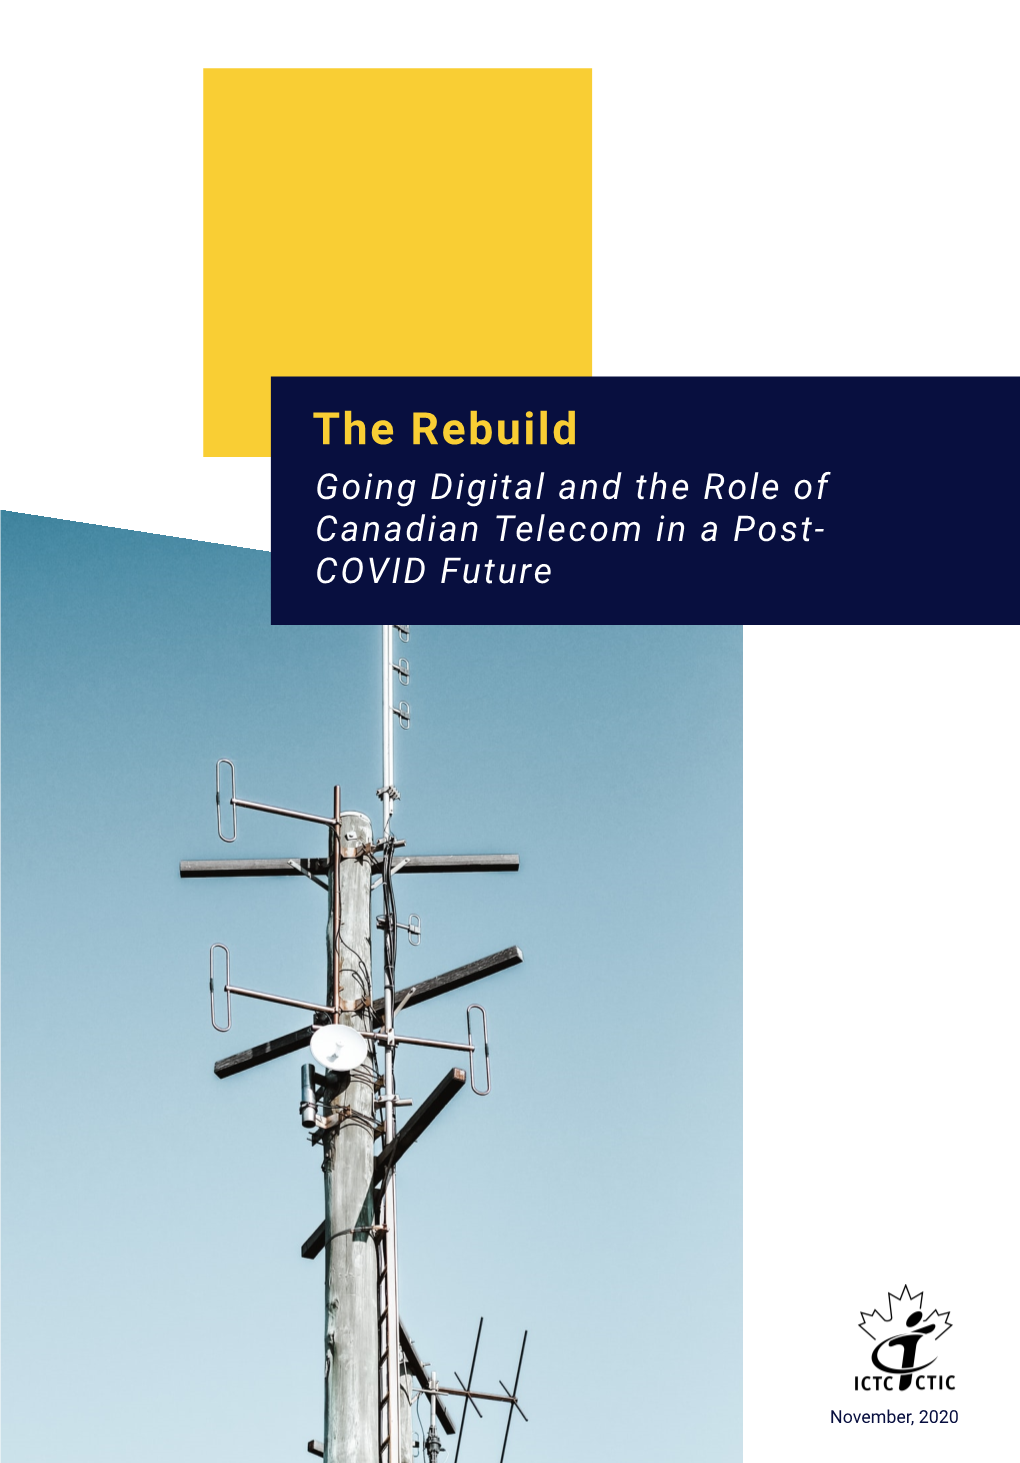 The Rebuild: Going Digital and the Role of Canadian Telecom in a Post-COVID Future” (November 2020), Information and Communications Technology Council